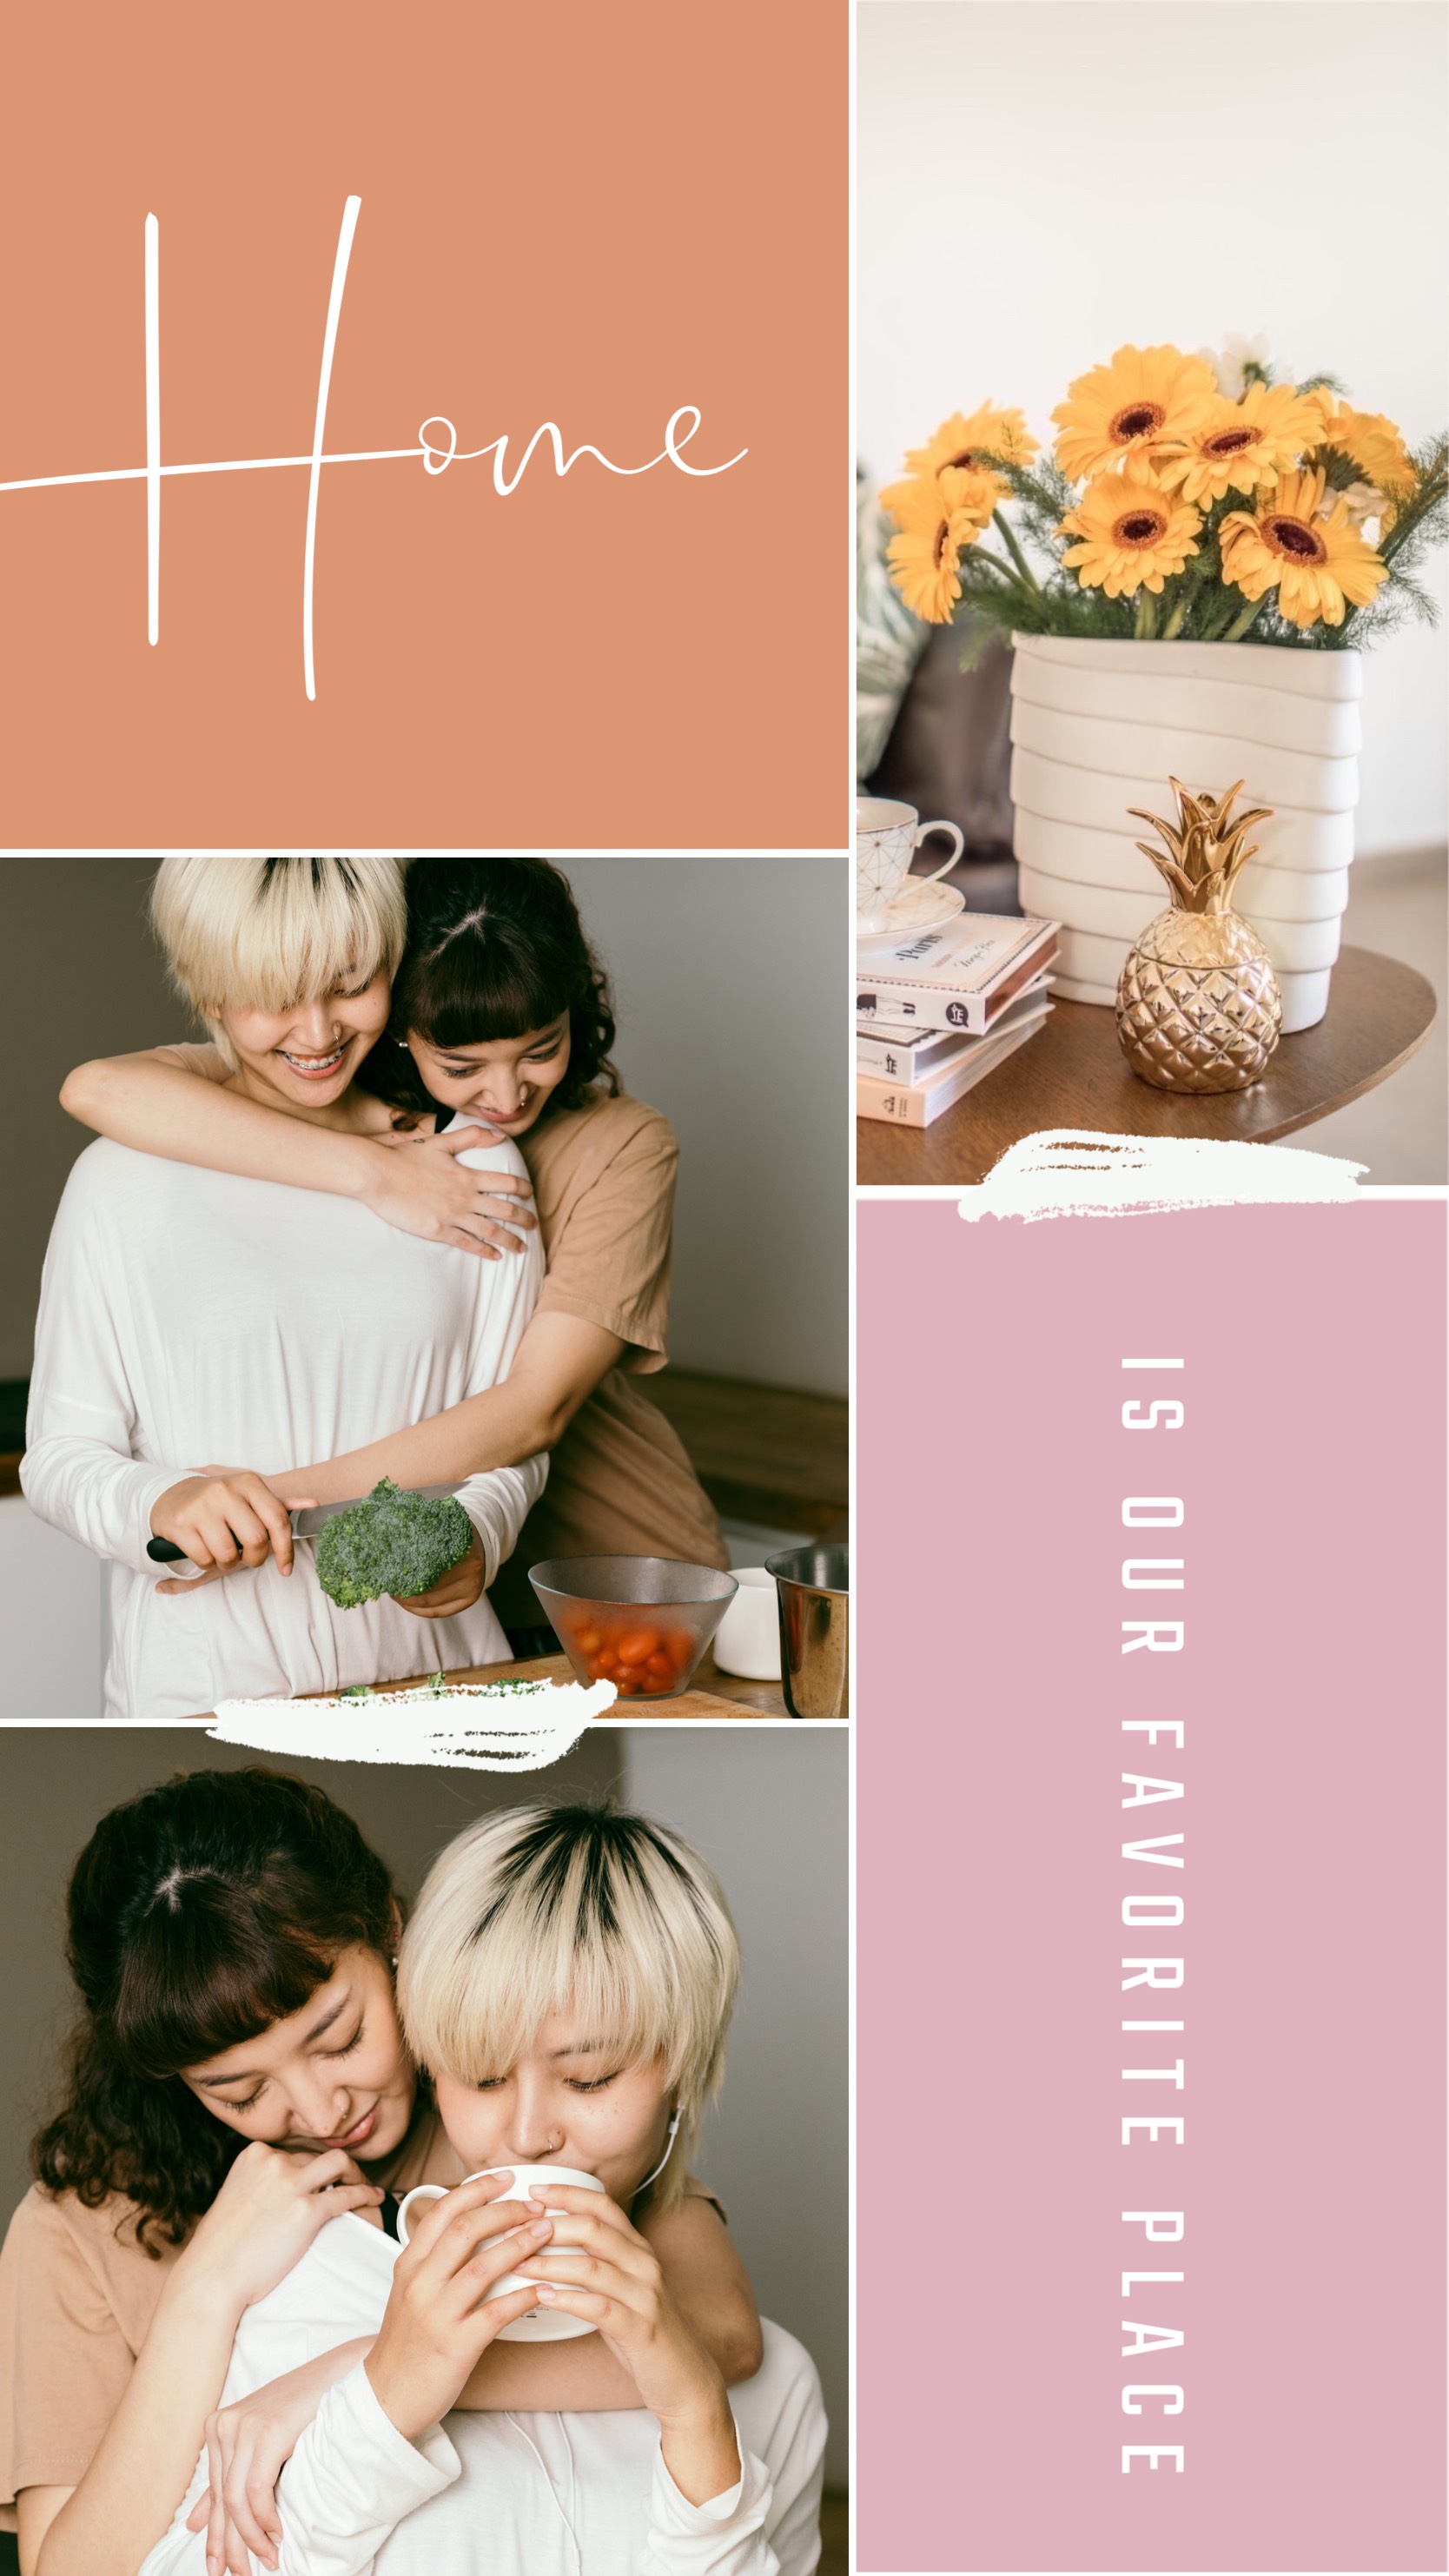 family day couple at home indoor Instagram story template